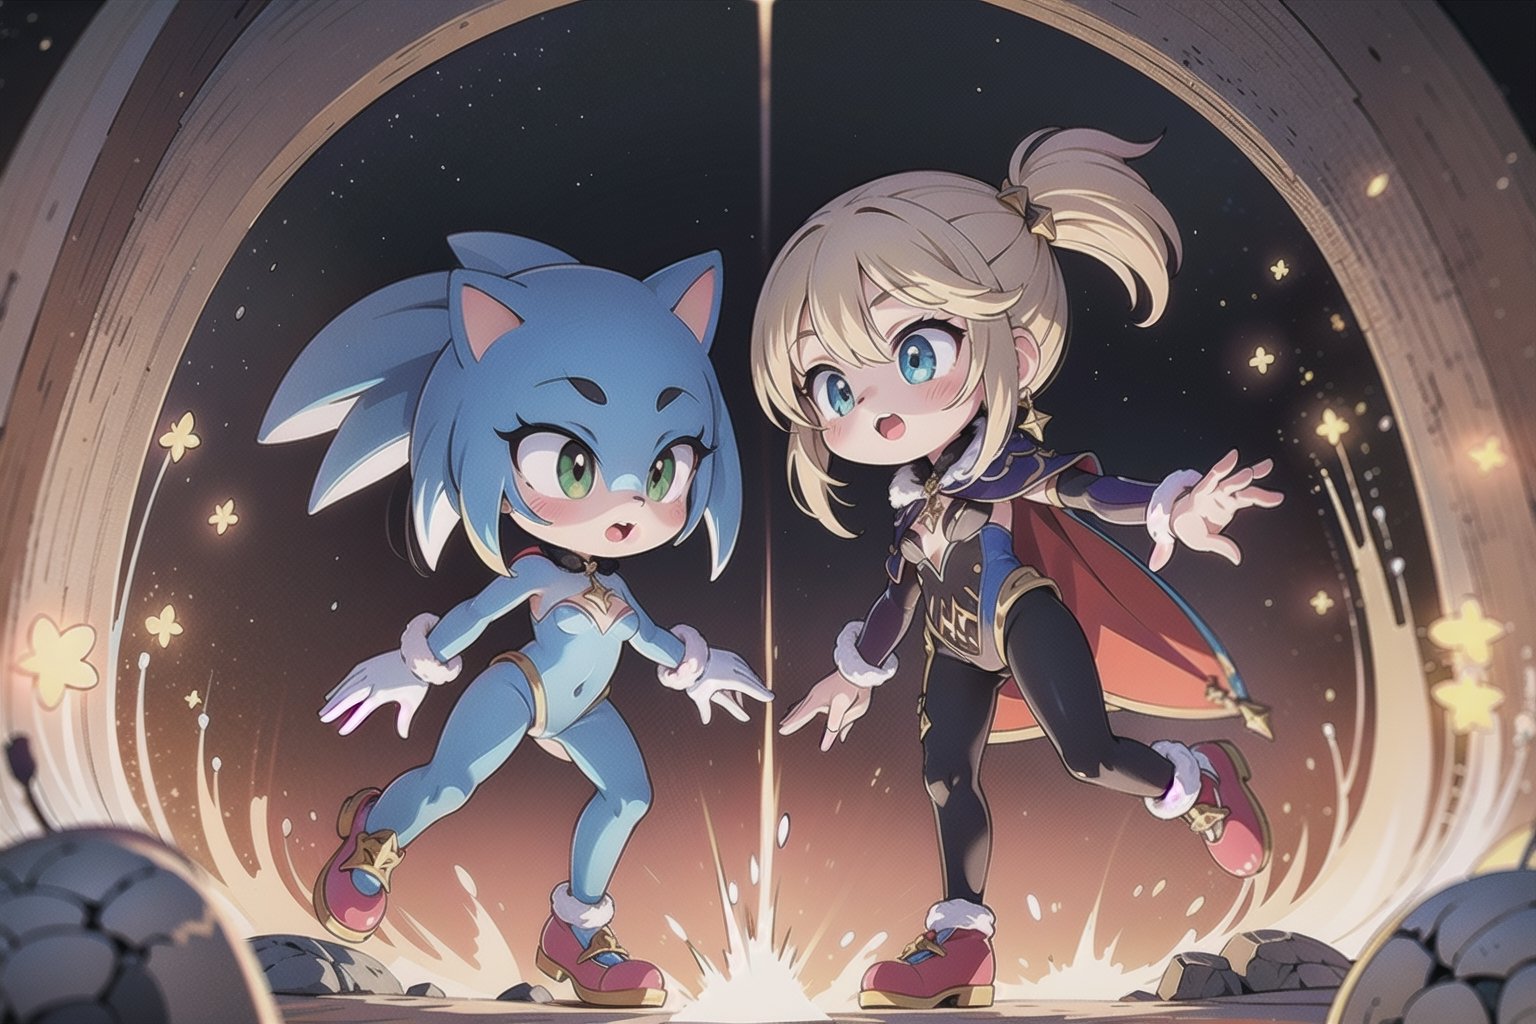 In a vivid, 32K UHD image, against Looney's sun-ornaged sky, Monadef and Sonic the Hedgehog stand together, dark silhouettes contrasting with the warm glow. Sonic's blue spikes and red shoes gleam on weathered stone, exuding kinetic energy. The scene appears ready to spring into action, as if characters might leap from the frame.